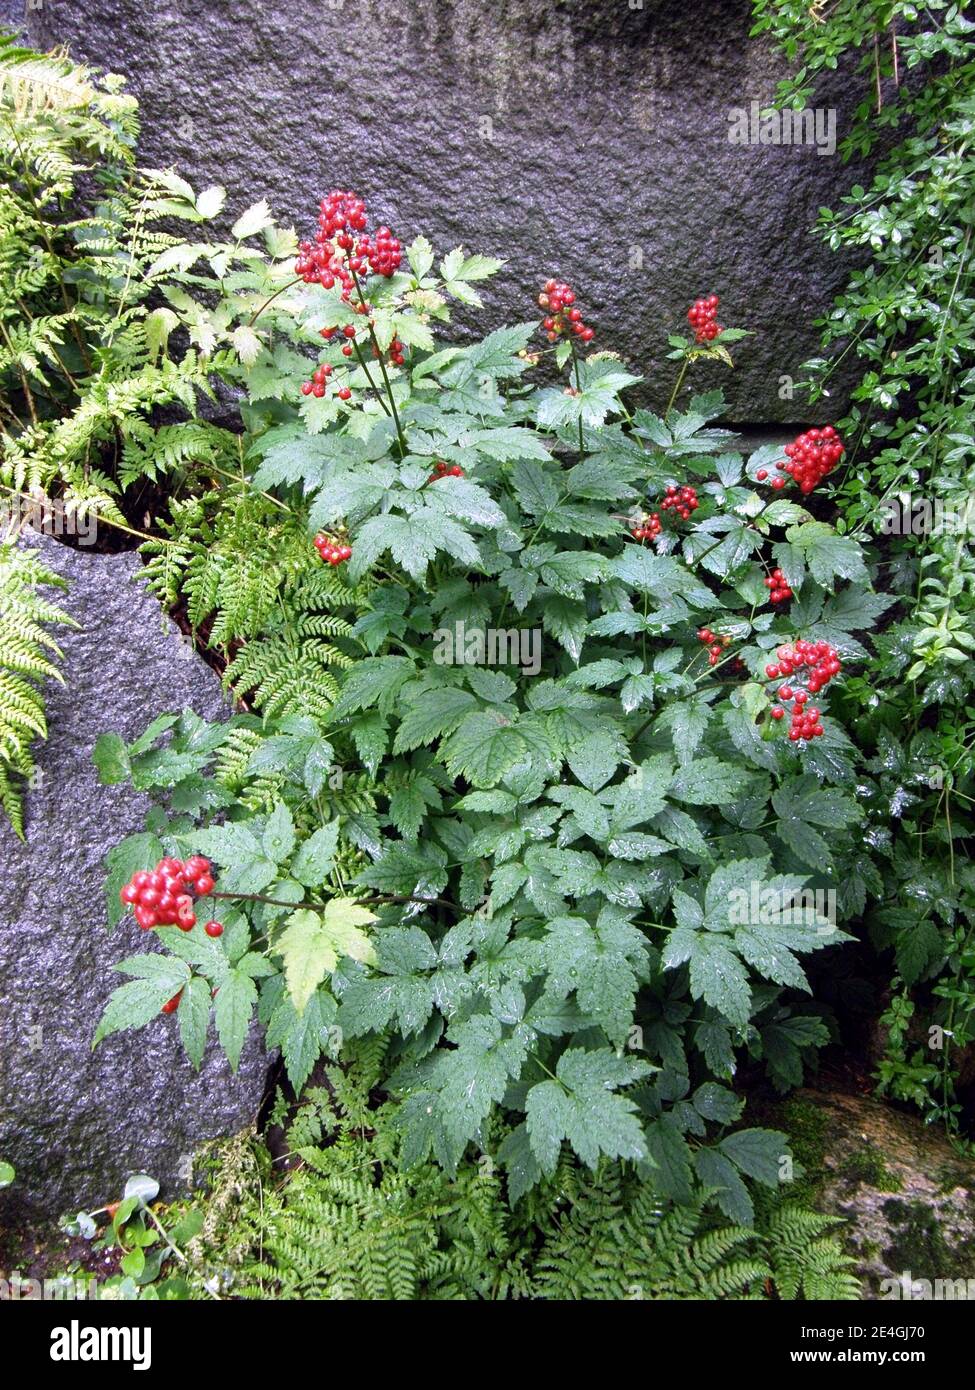 Shiny scarlet fruits of red baneberry (Actaea rubra) in a garden in July Stock Photo